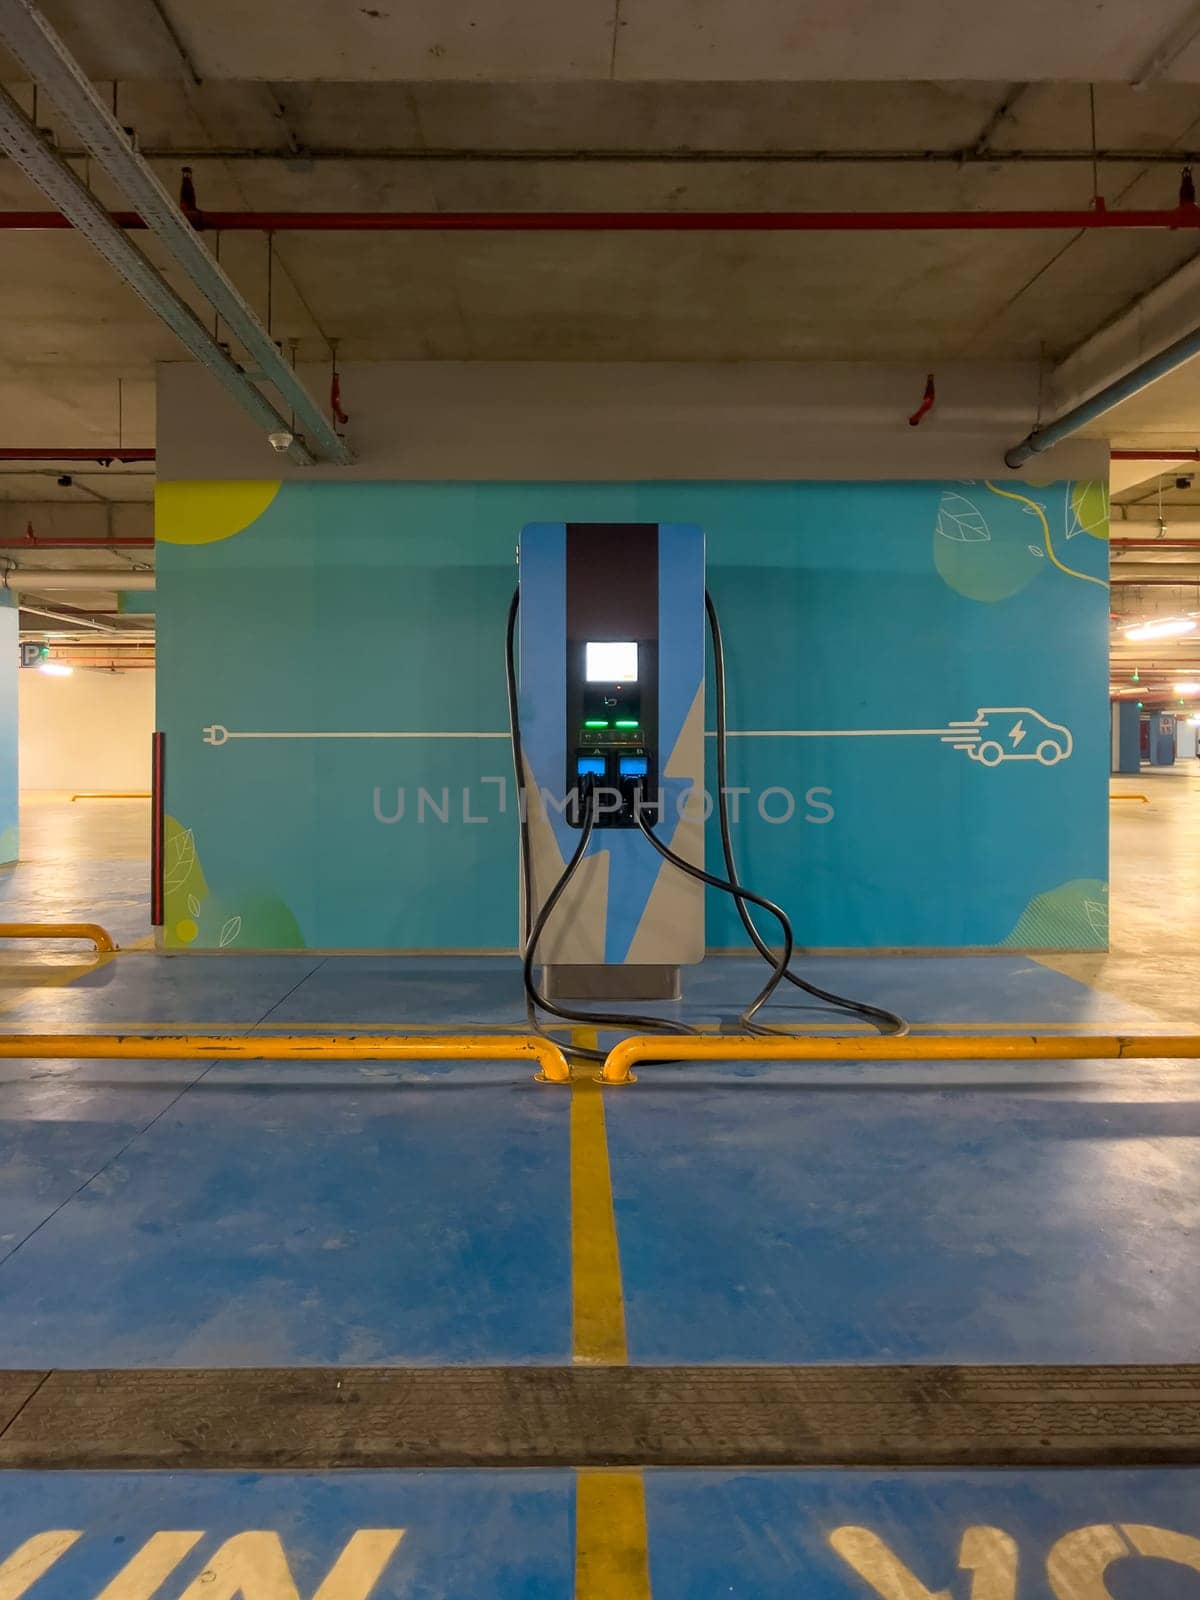 DC charging station to charge electric vehicles in the parking garage of the shopping mall by Sonat